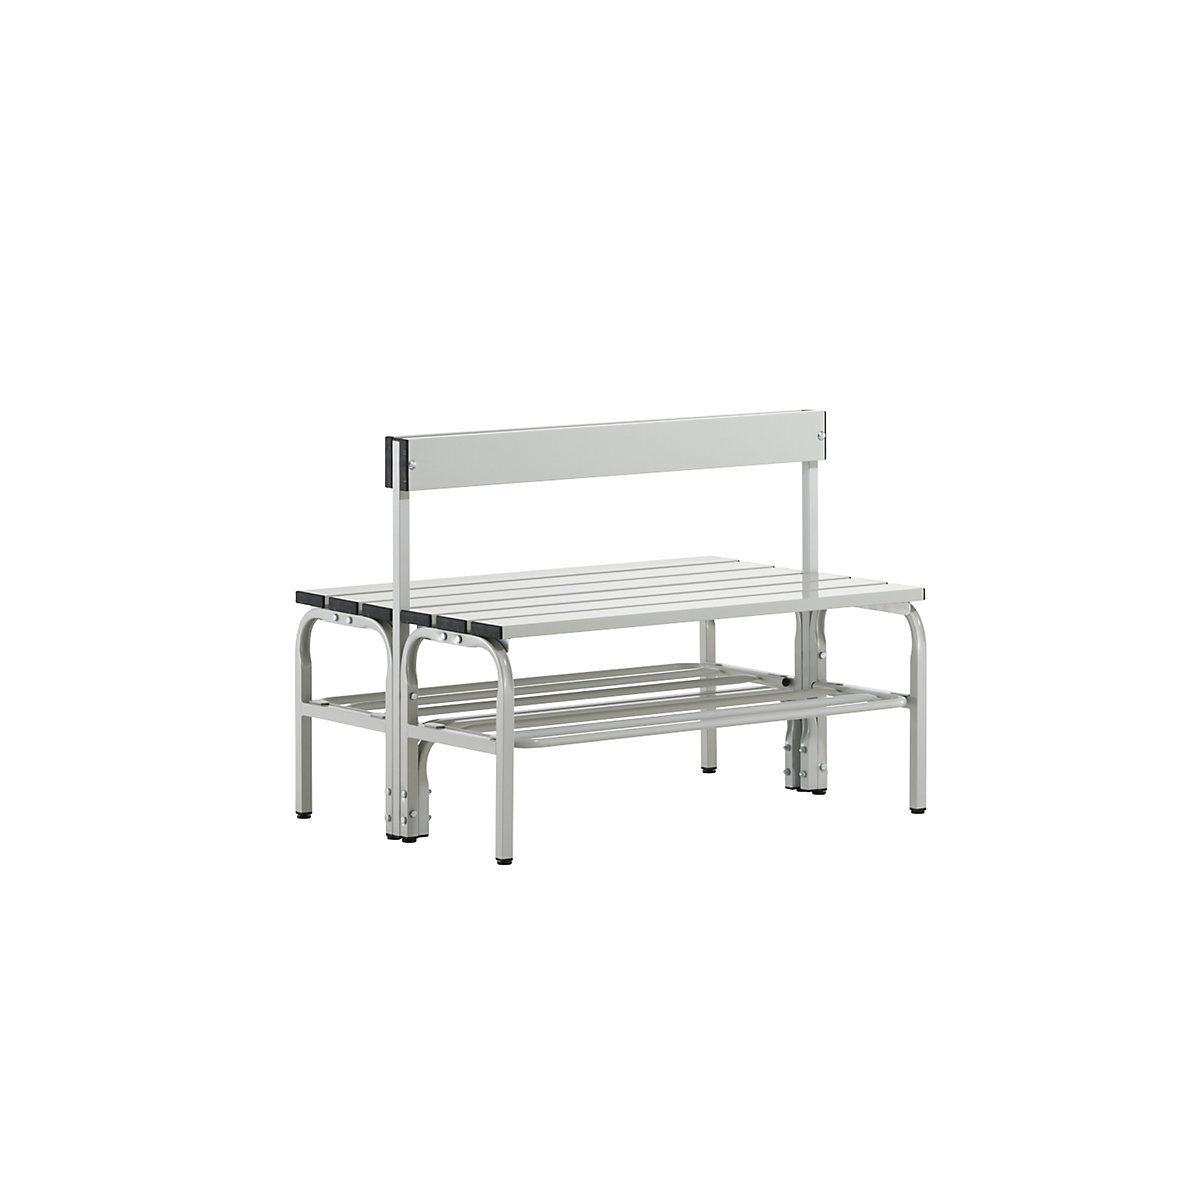 Sypro – Half height cloakroom bench with back rest, double sided, aluminium, length 1015 mm, light grey, shoe rack